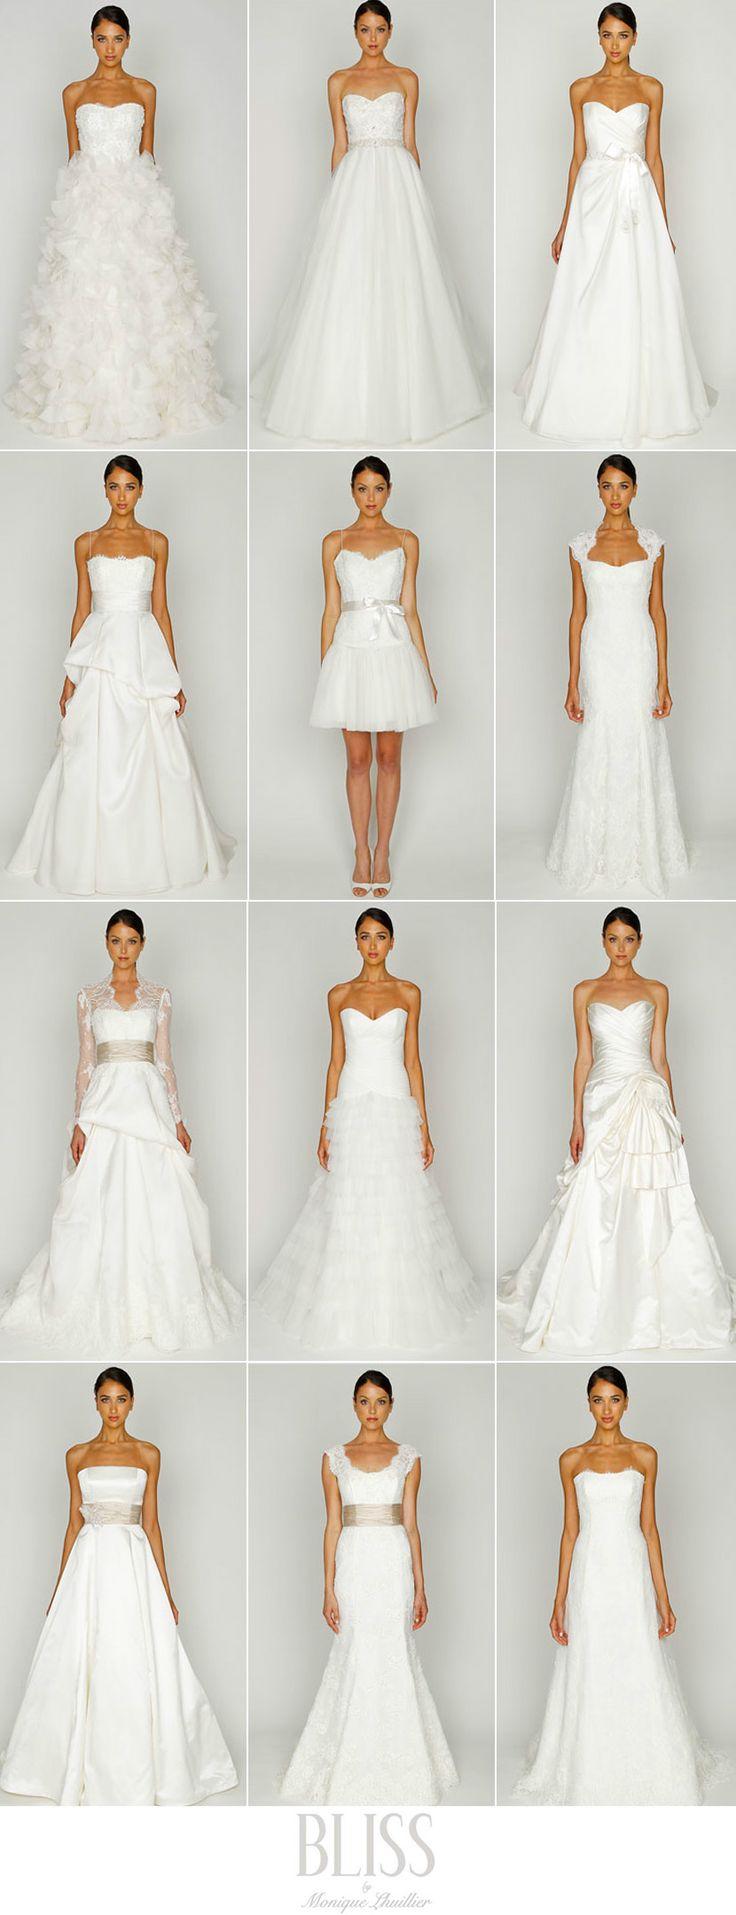 Mariage - Wedding Dress Shapes - Good Guide To Look At Before You Go Hunting For Your Wedding Dress